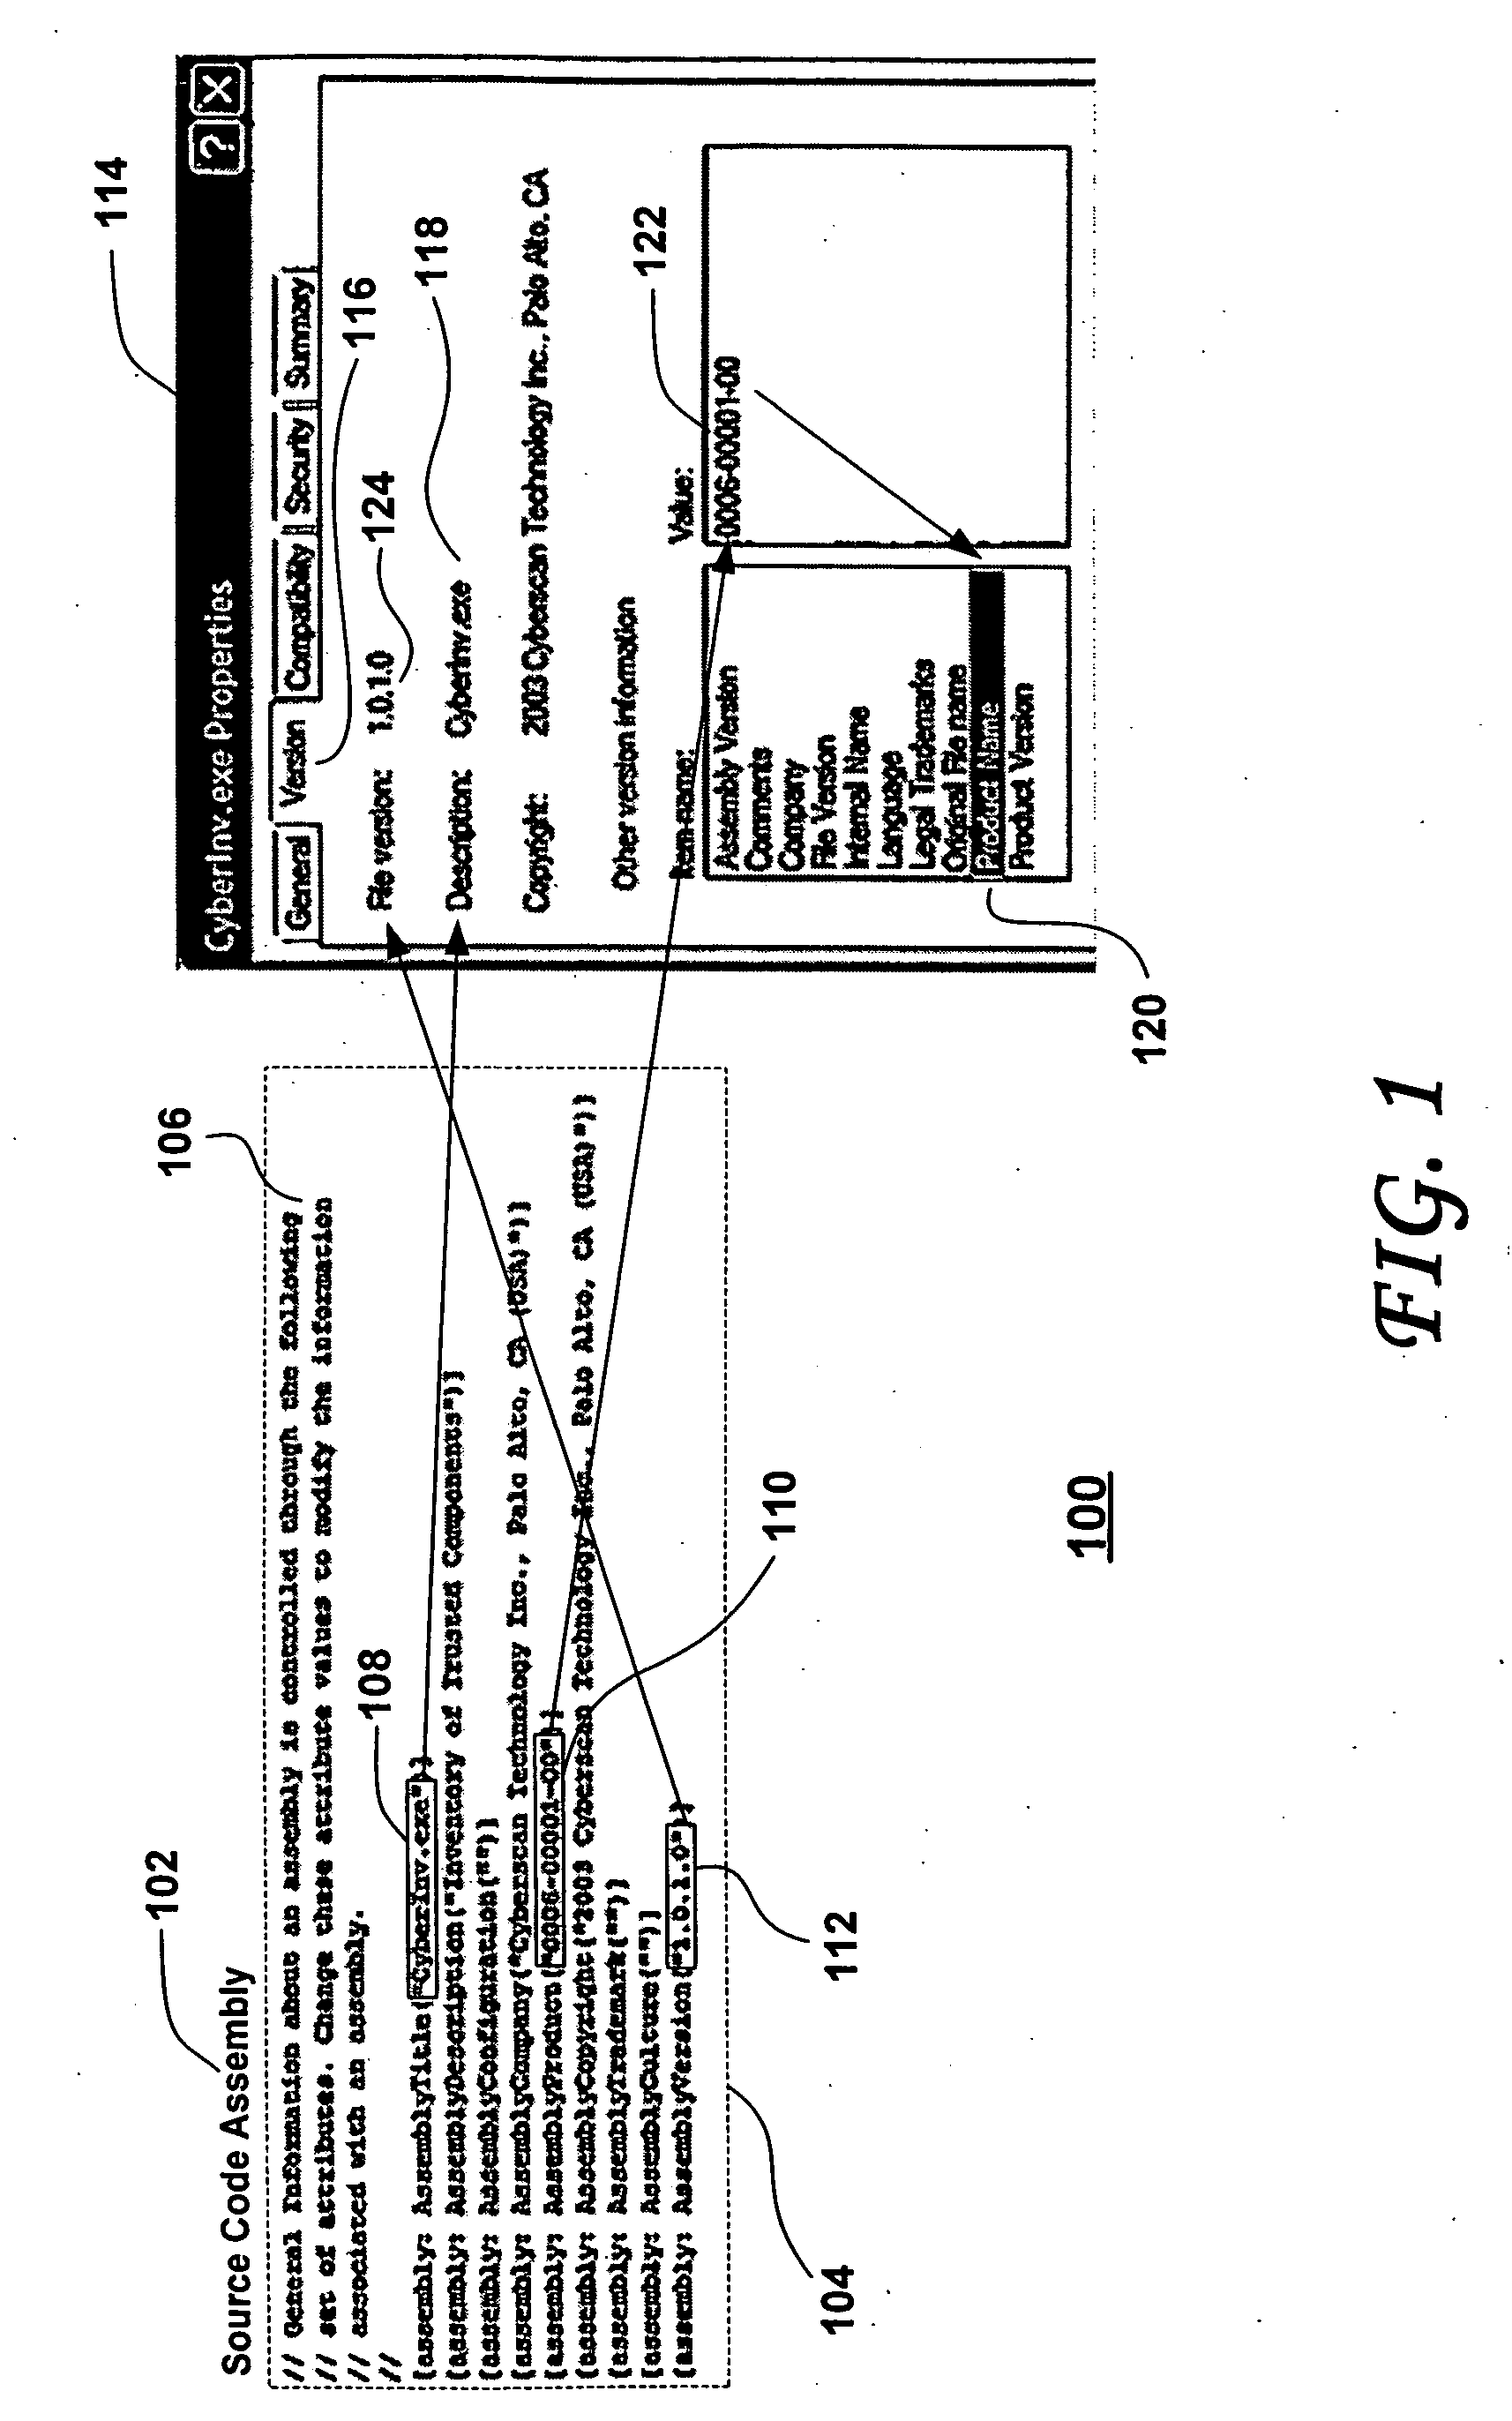 Dynamic configuration of a gaming system